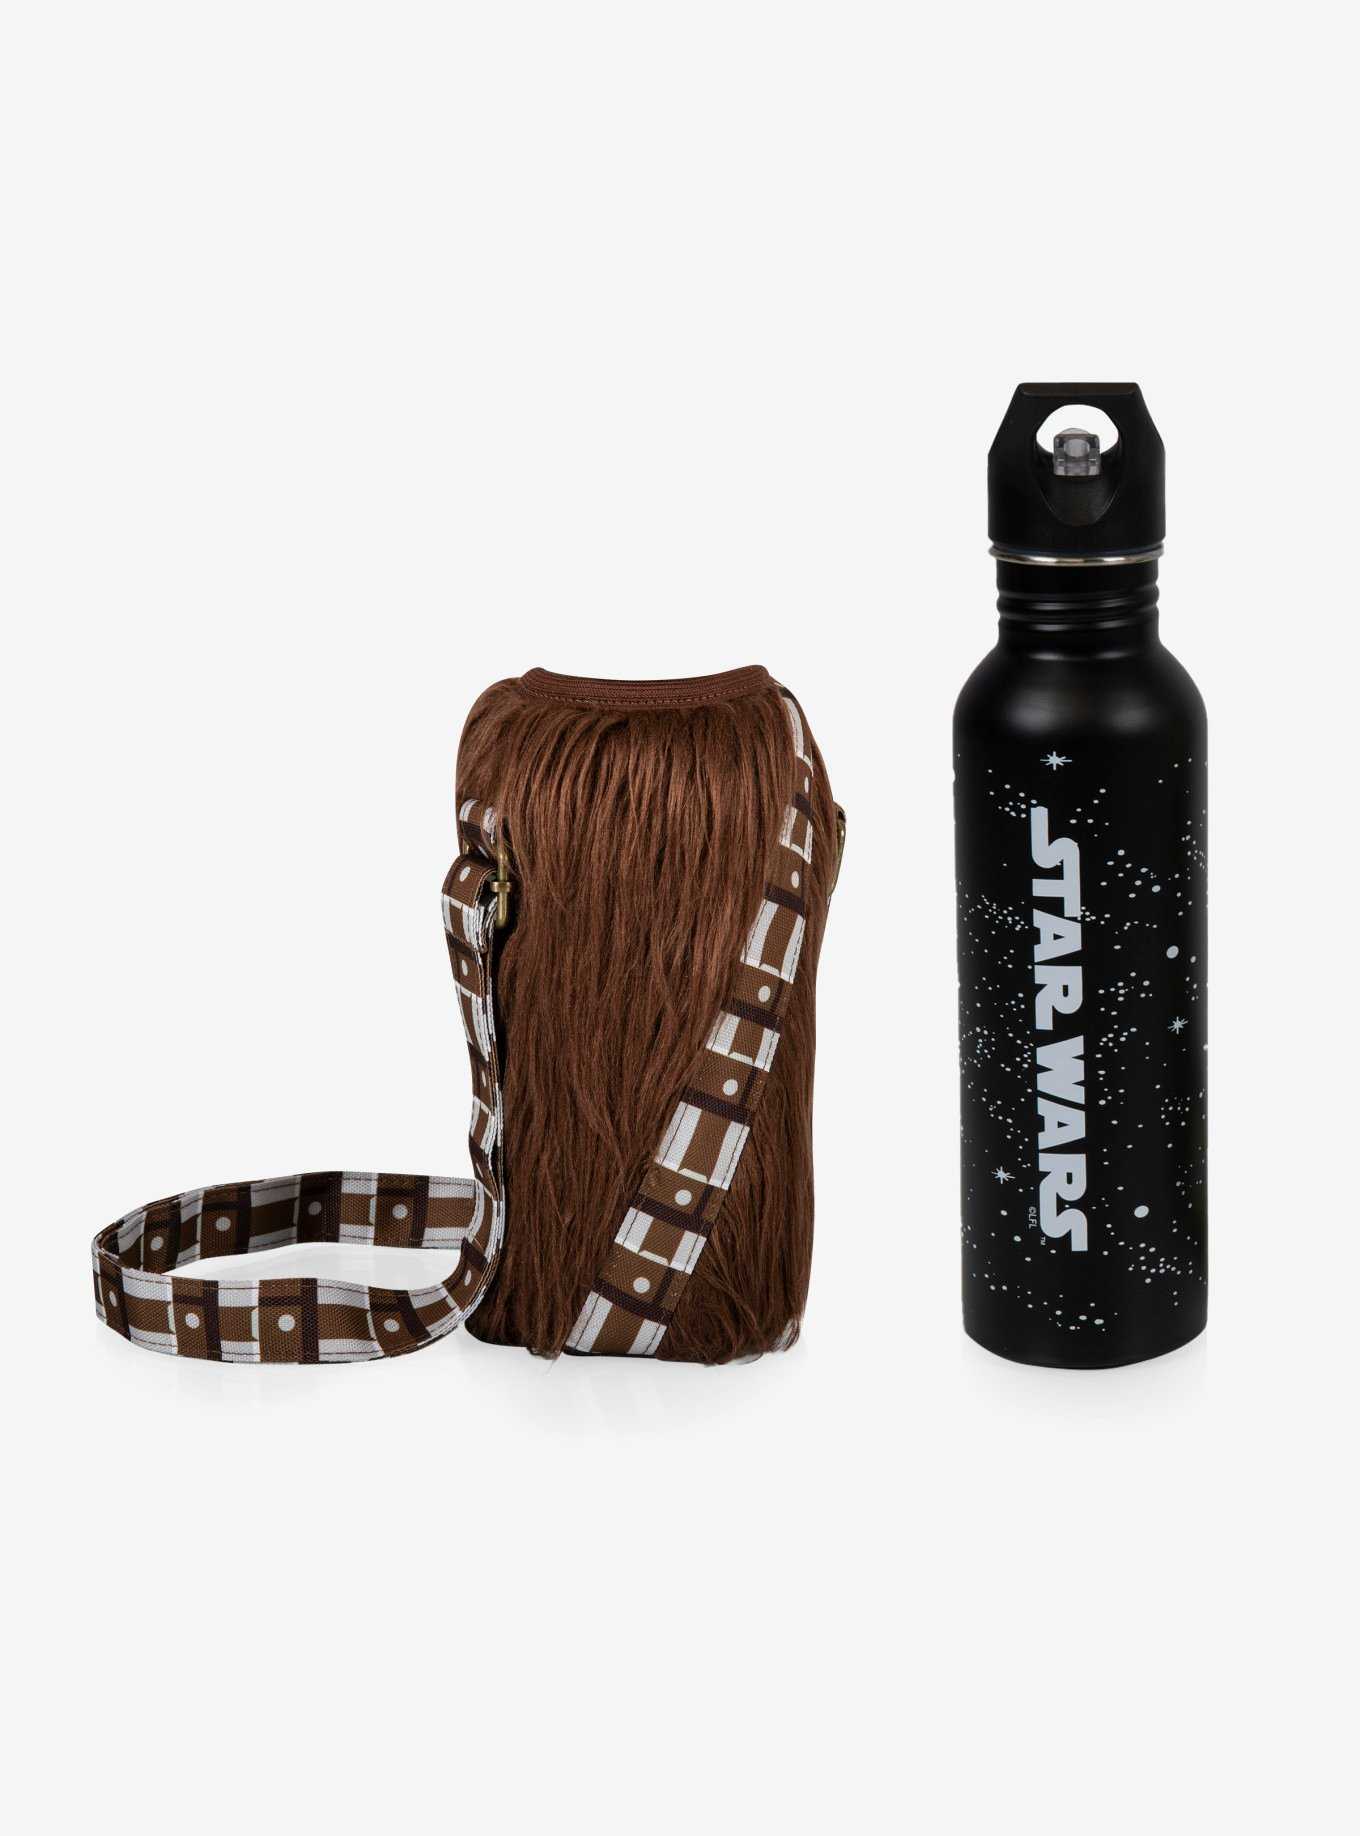 Star Wars Chewbacca Water Bottle with Cooler Tote, , hi-res